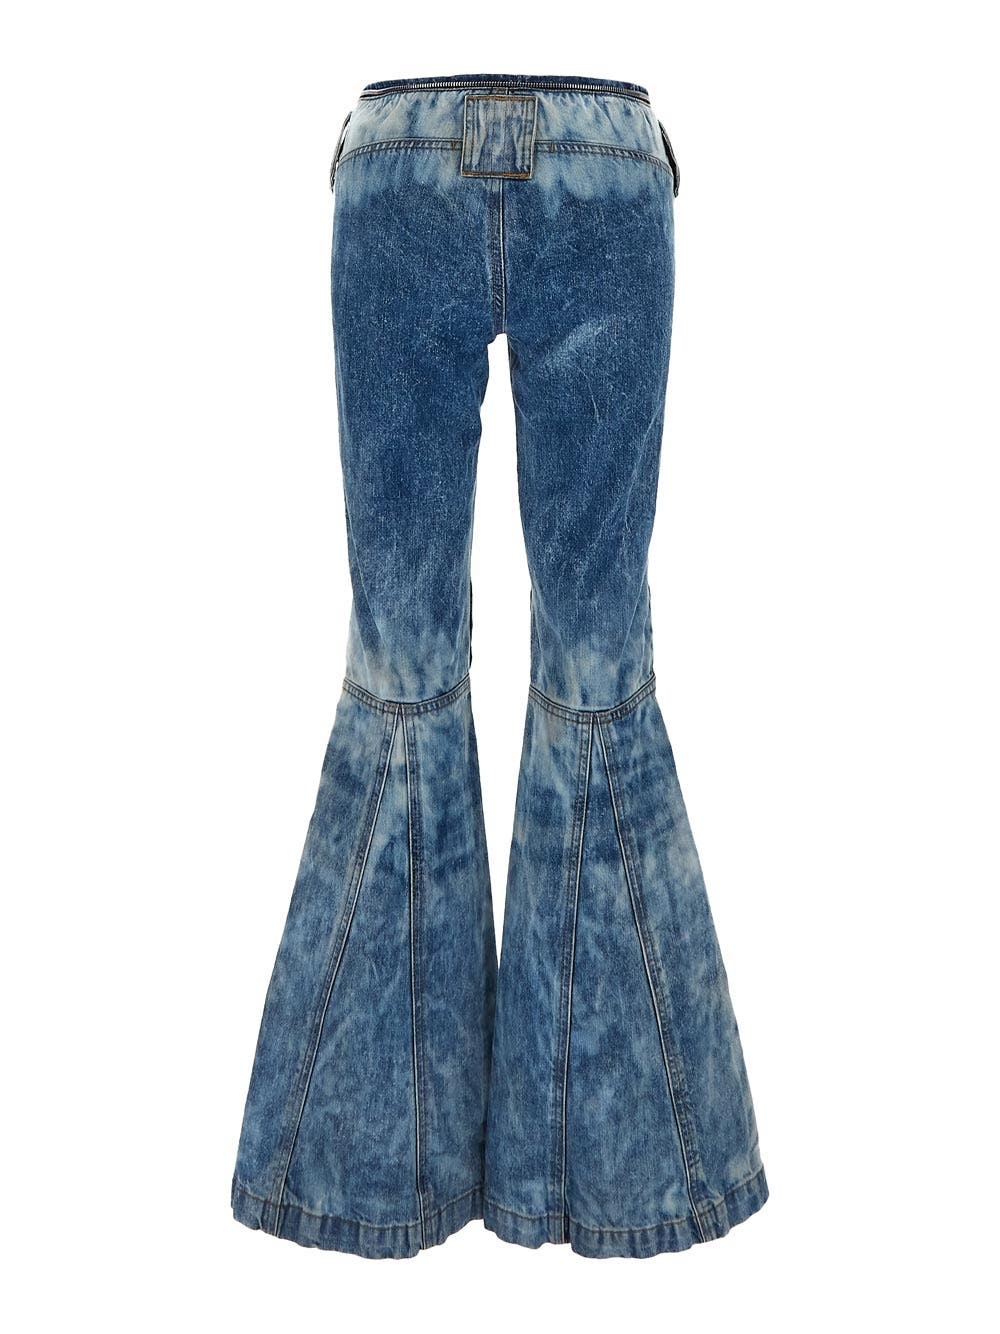 90's Jeans - 2